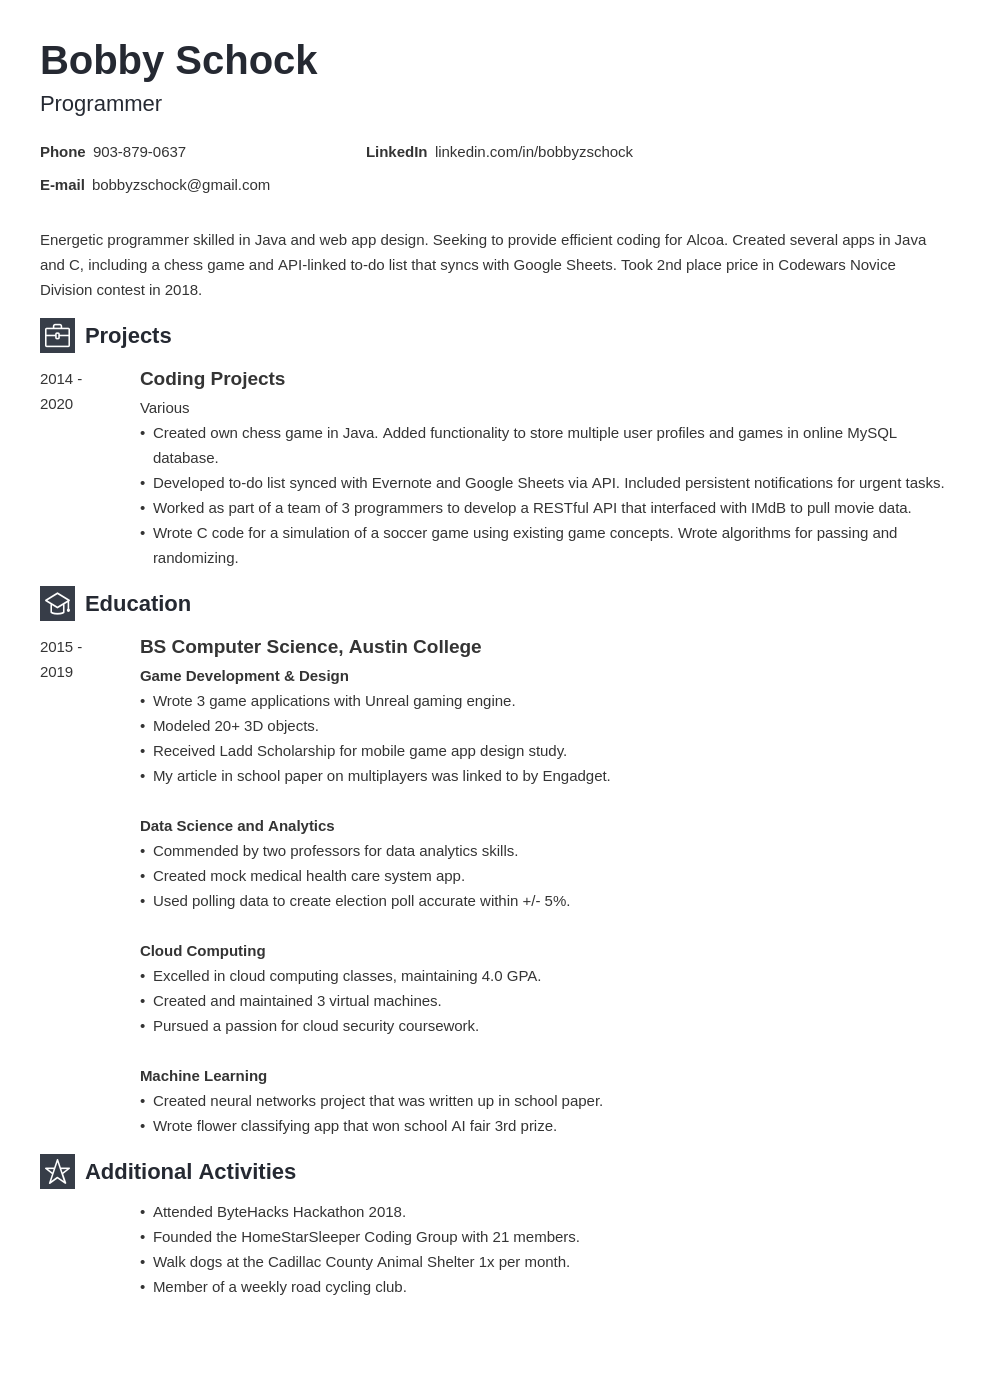 How to Make a Resume for a First Job  No Experience [Samples]